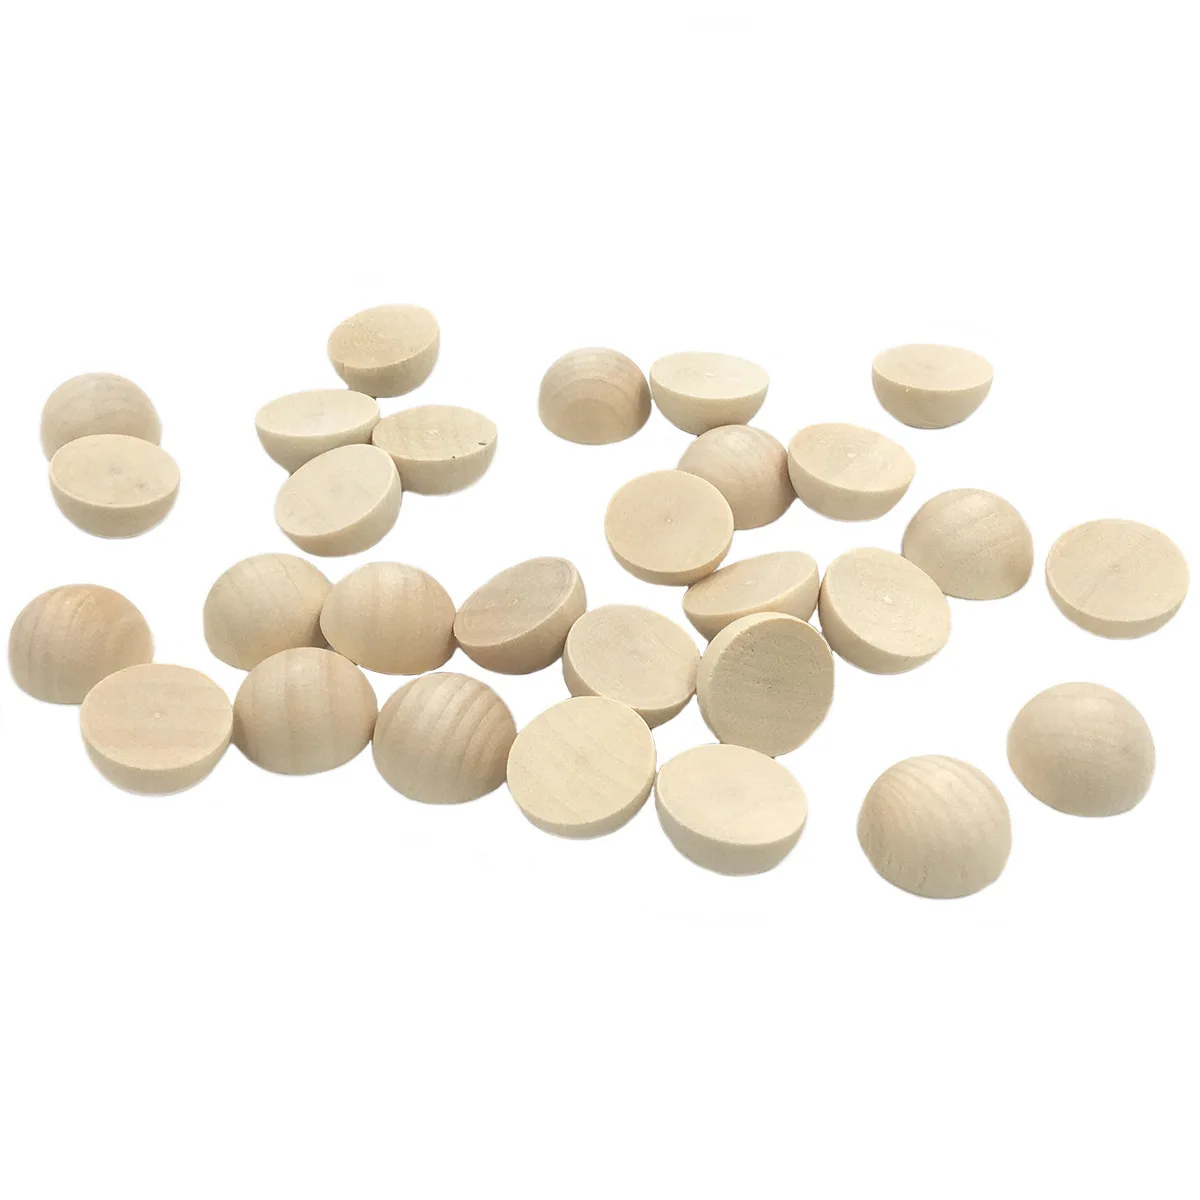 

Half Wooden Beads Unfinished Split Round Wood Balls For Craft Paint (15mm), Natural